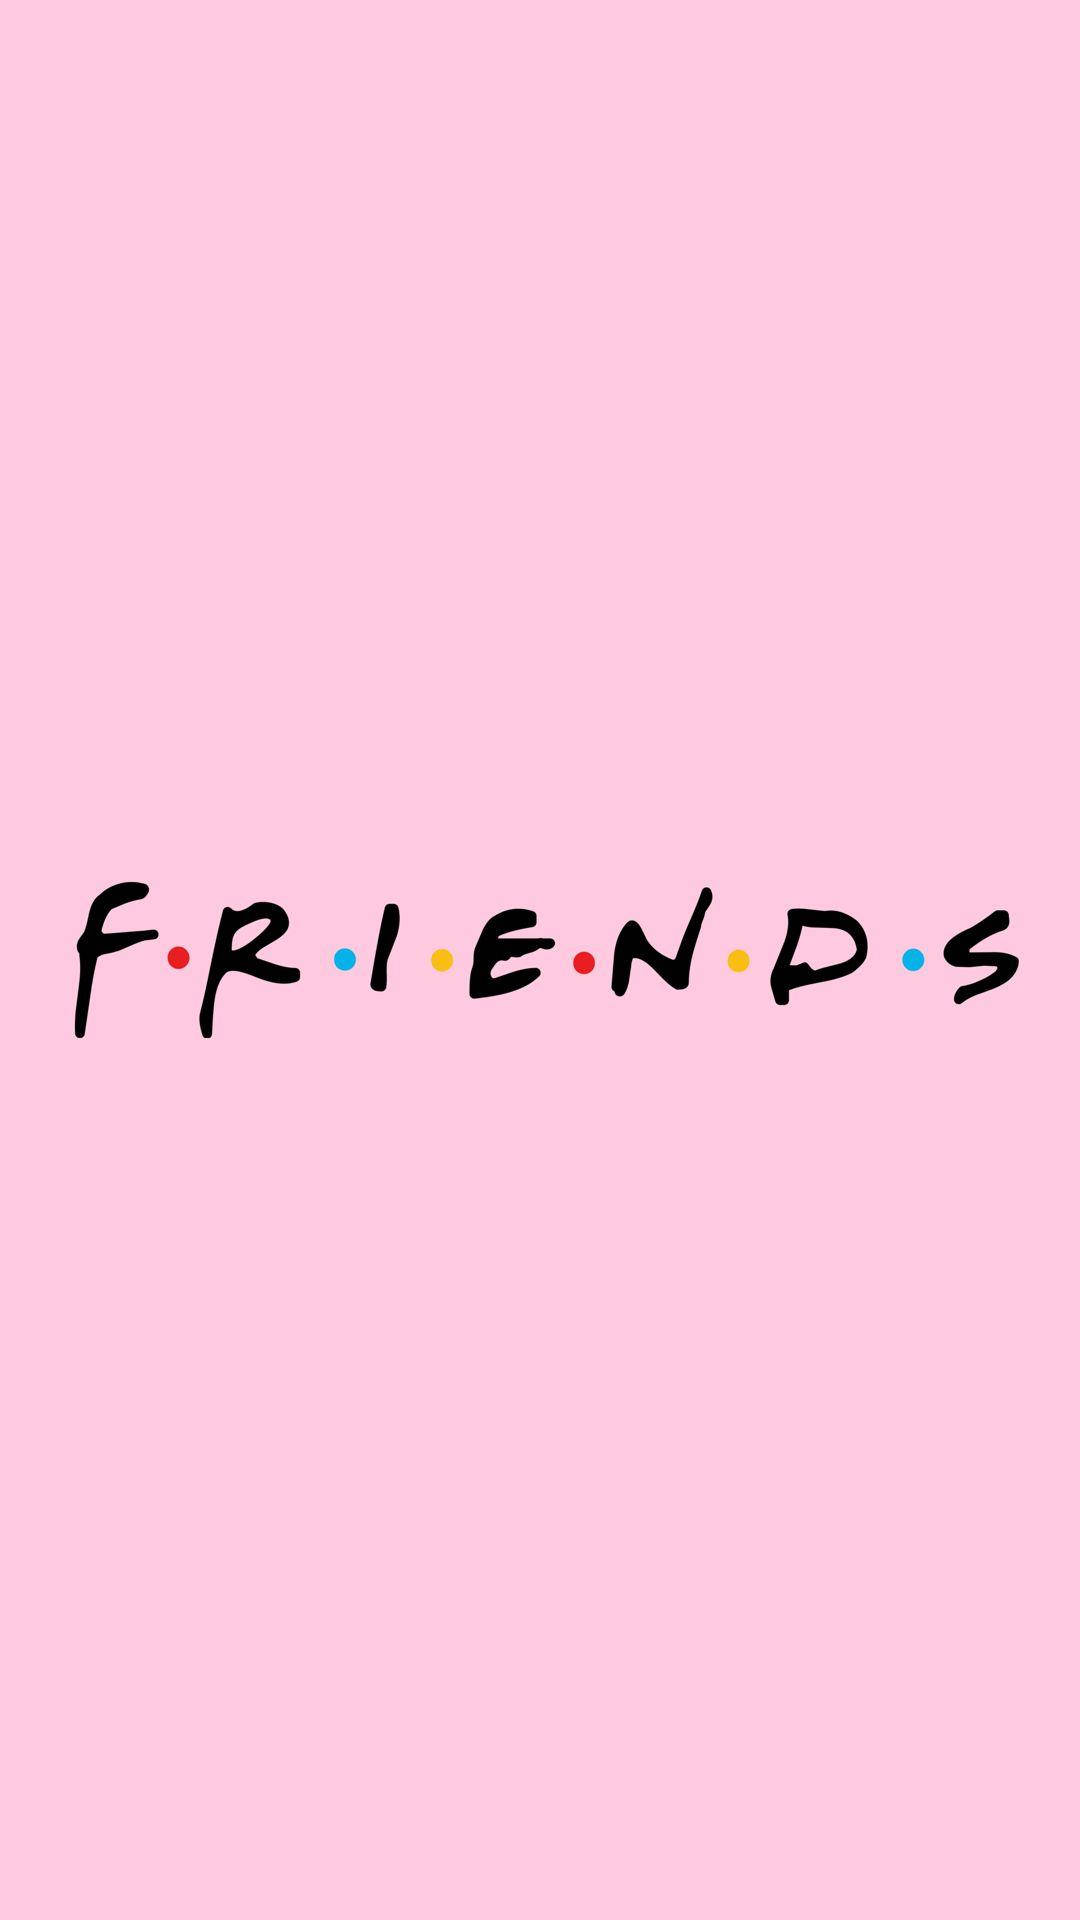 Aesthetic Pink Iphone Friends Logo Background